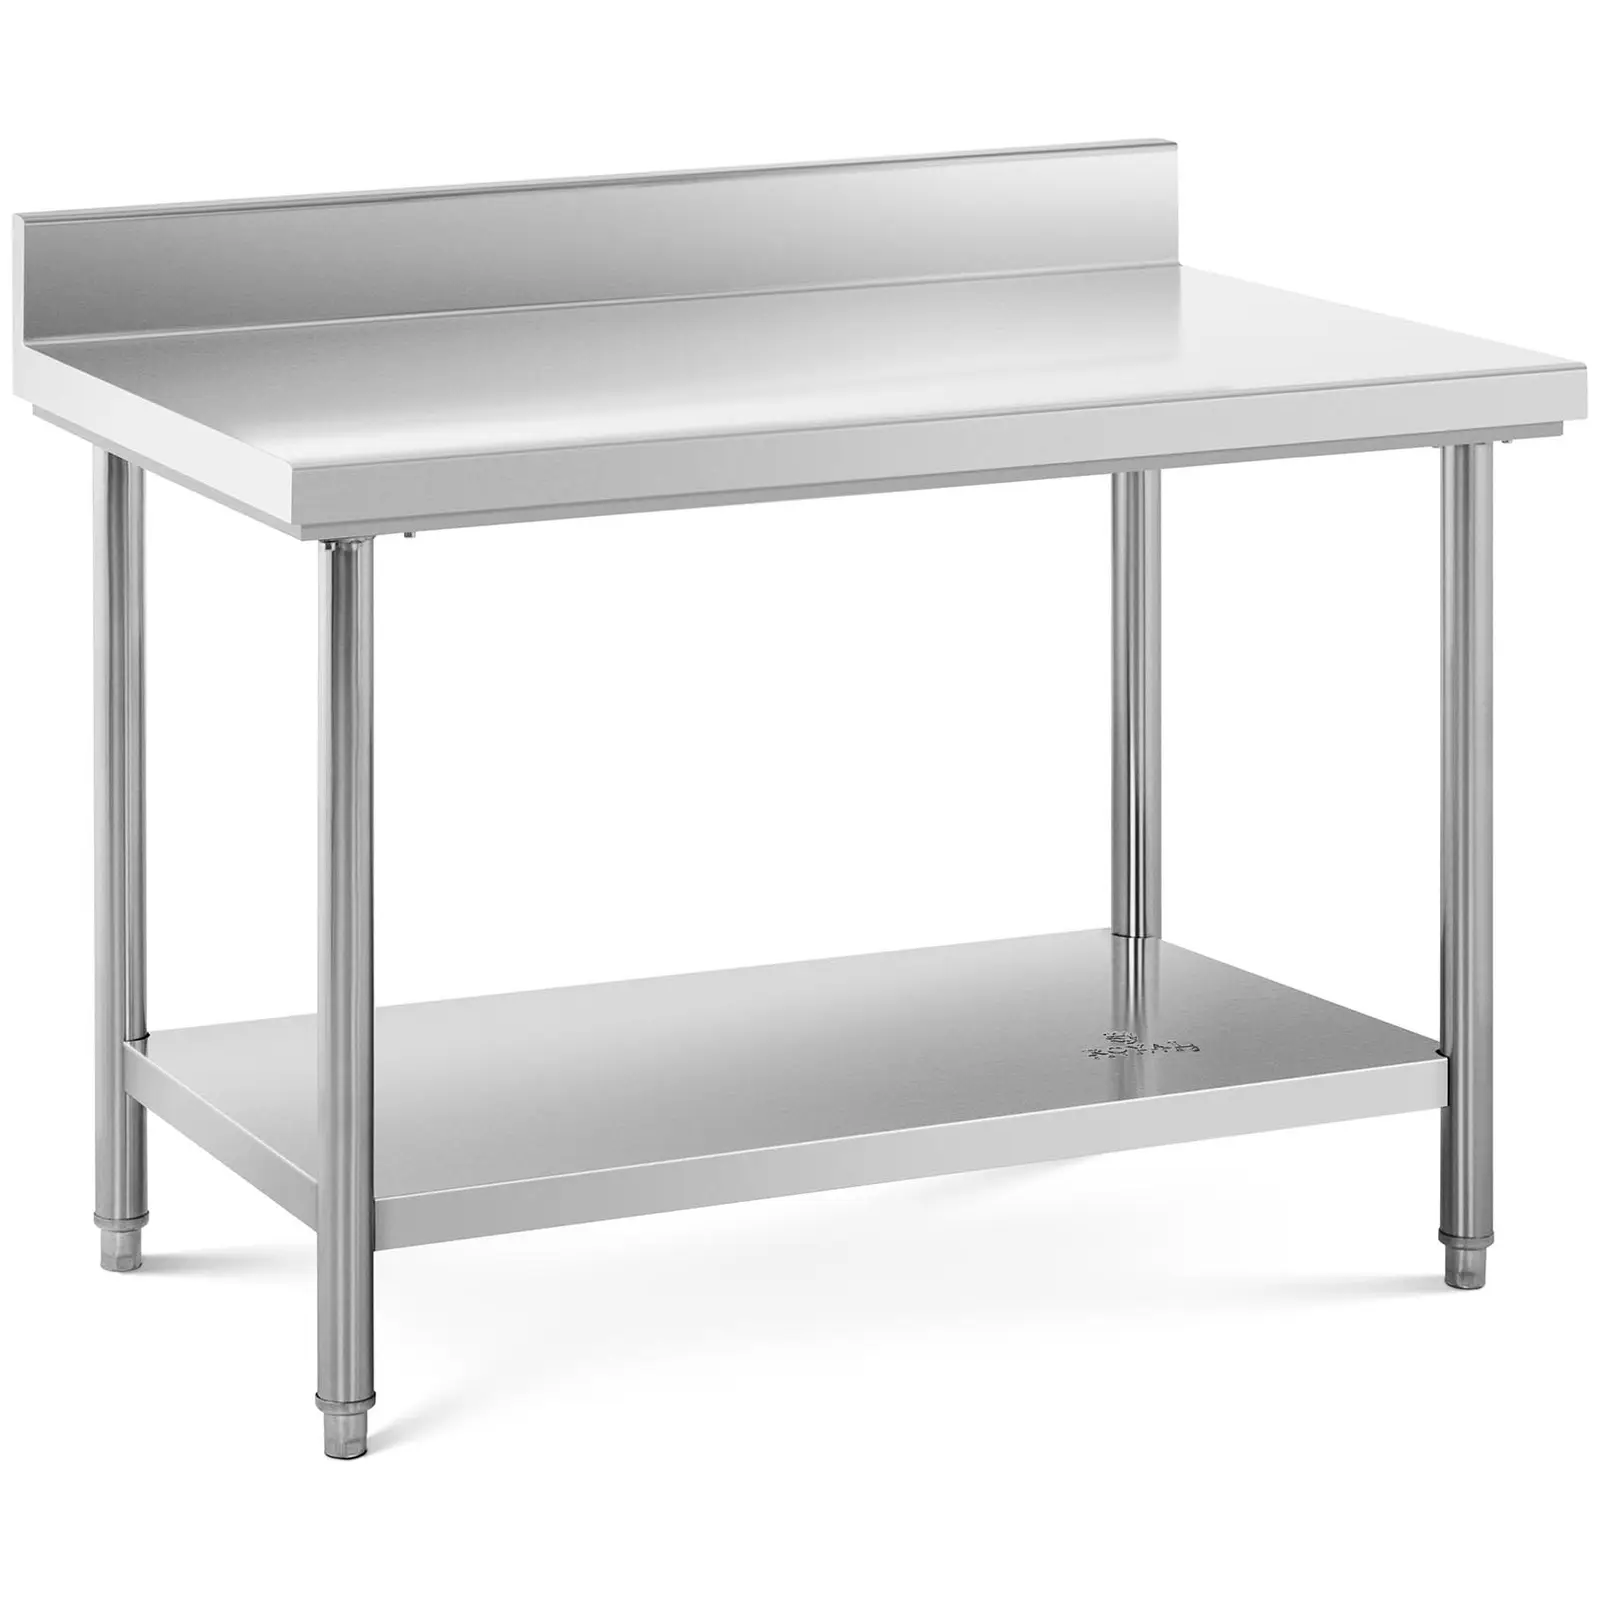 RVS tafel - 120 x 70 cm - opstand - 143 kg draagvermogen - Royal Catering